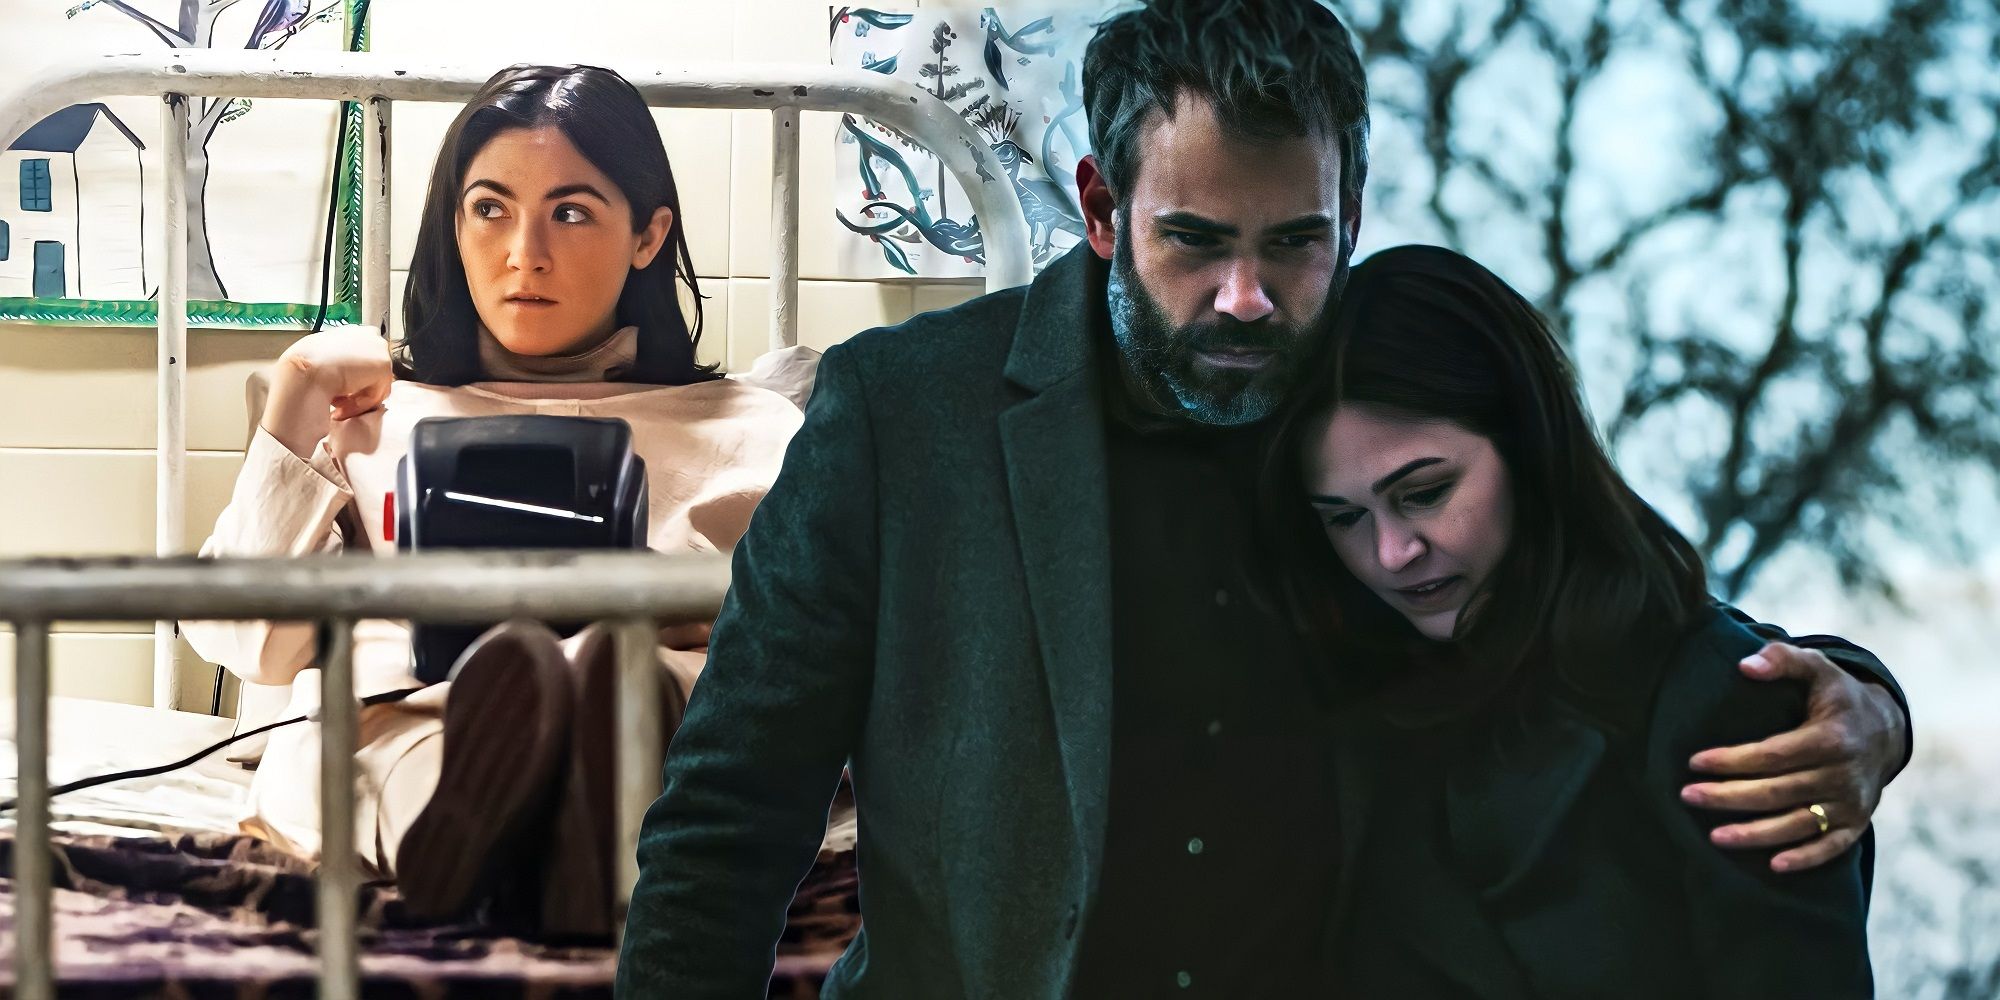 Isabelle Fuhrman as Esther and Rossif Sutherland as Allen in Orphan: First Kill